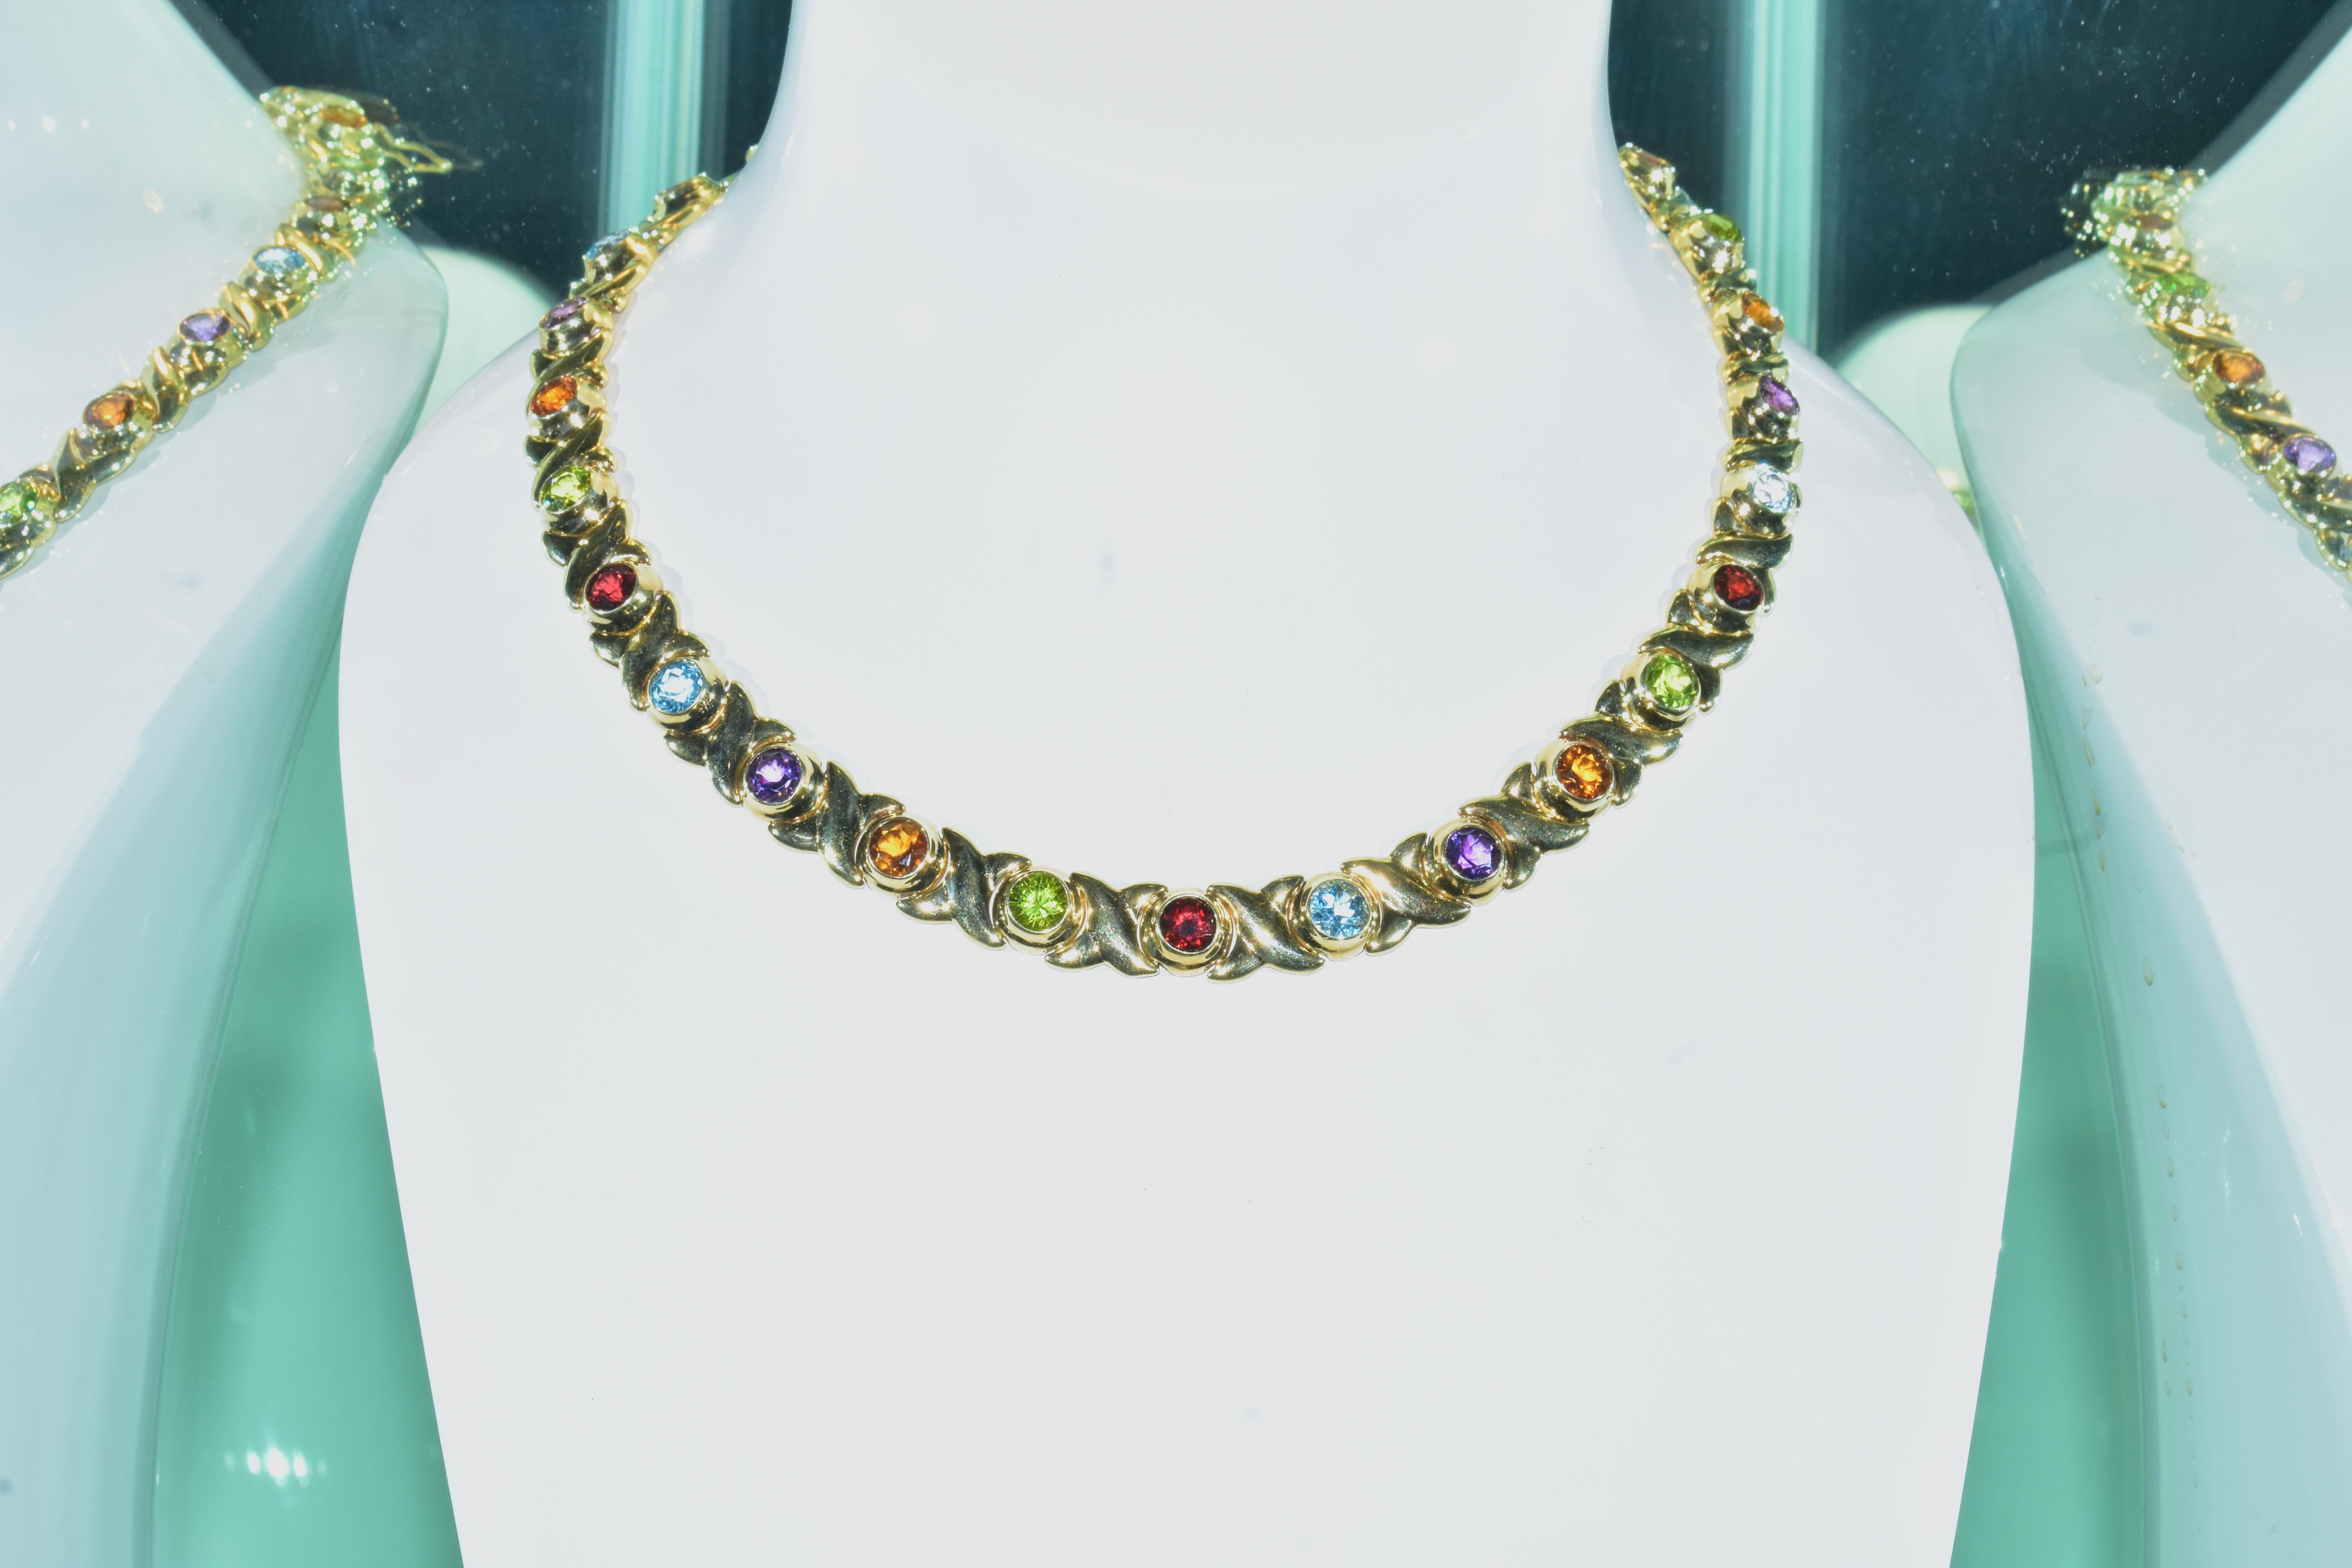 Gem Set Yellow Gold Vintage Necklace with Peridot, Amethyst, Citrine, and Garnet For Sale 2